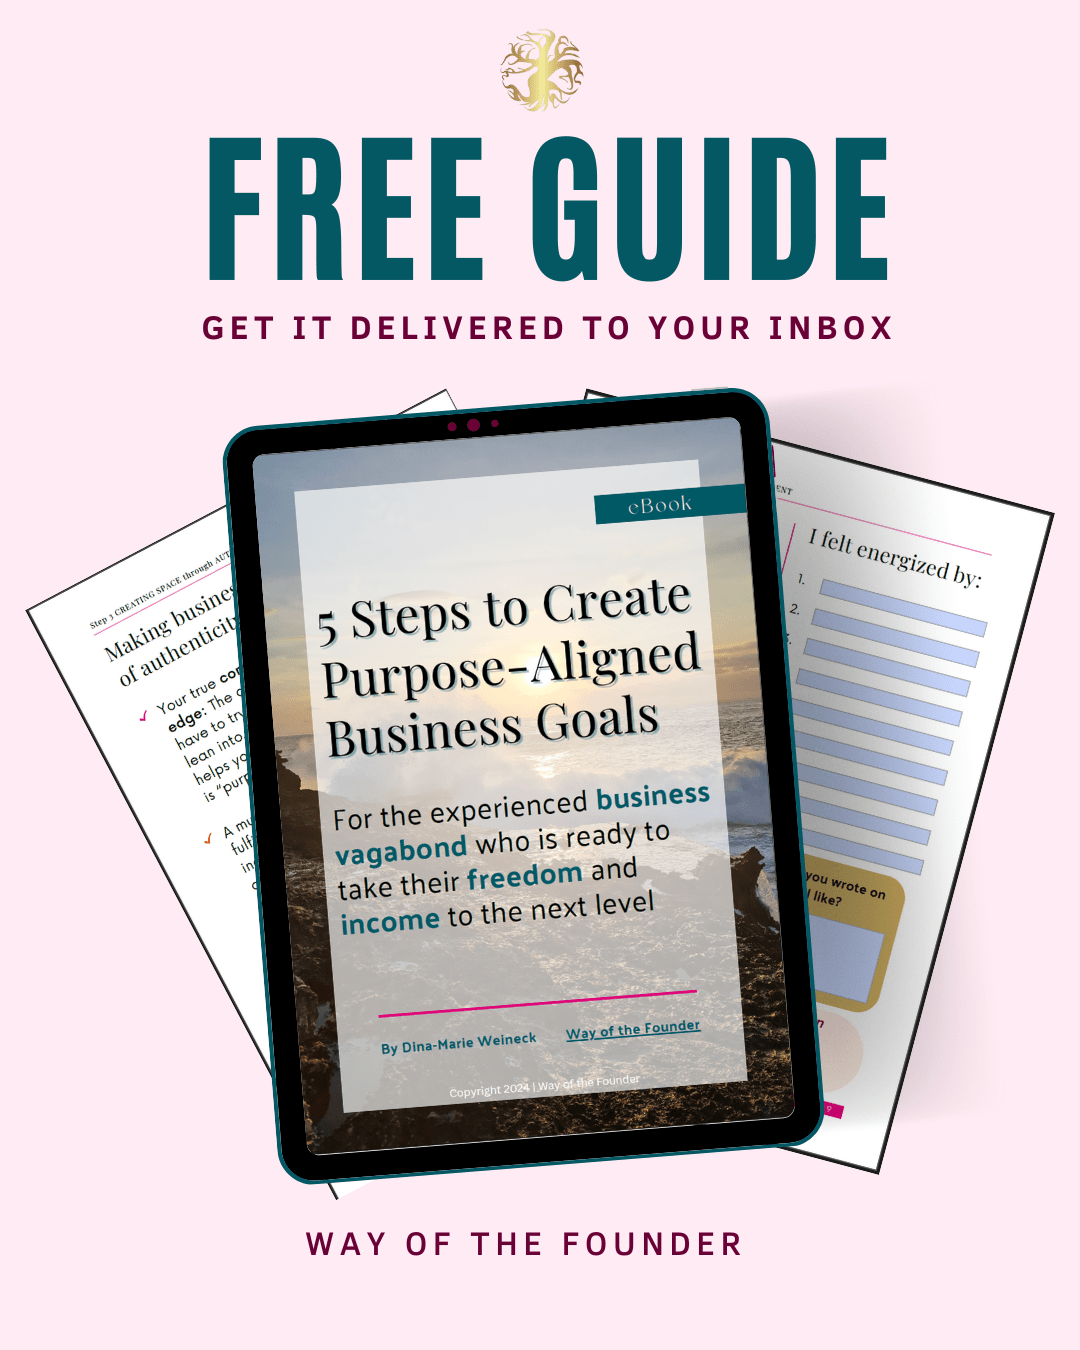 Invitation to download my free guide for Nomad Entrepreneurs to create purpose-aligned business goals